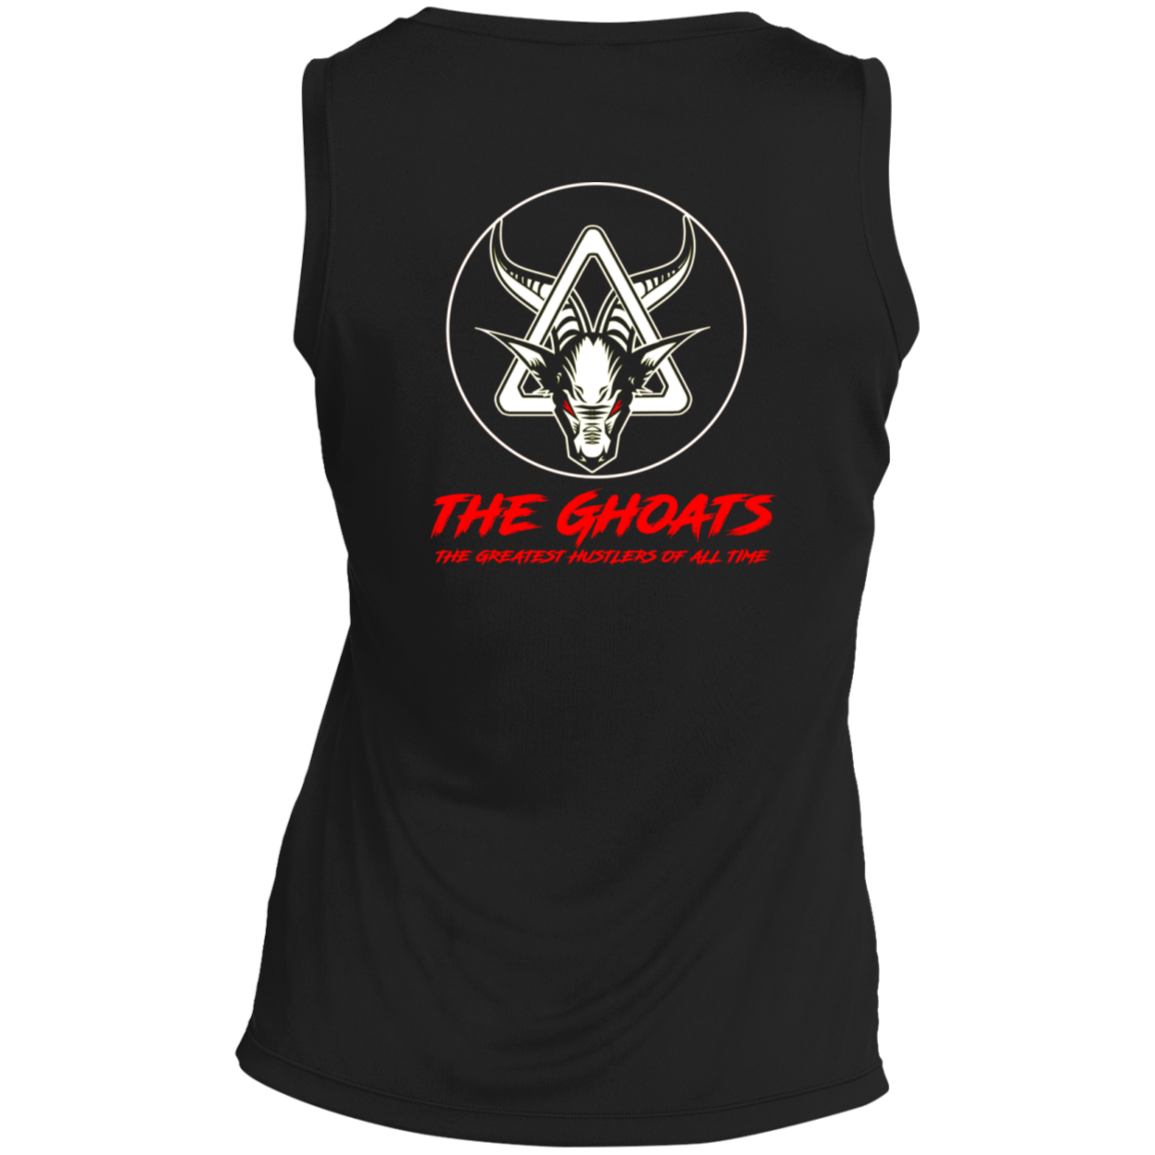 The GHOATS Custom Design #3. Beware of Sharks. Pool/Card Shark. Ladies' 100% polyester interlock with PosiCharge technology